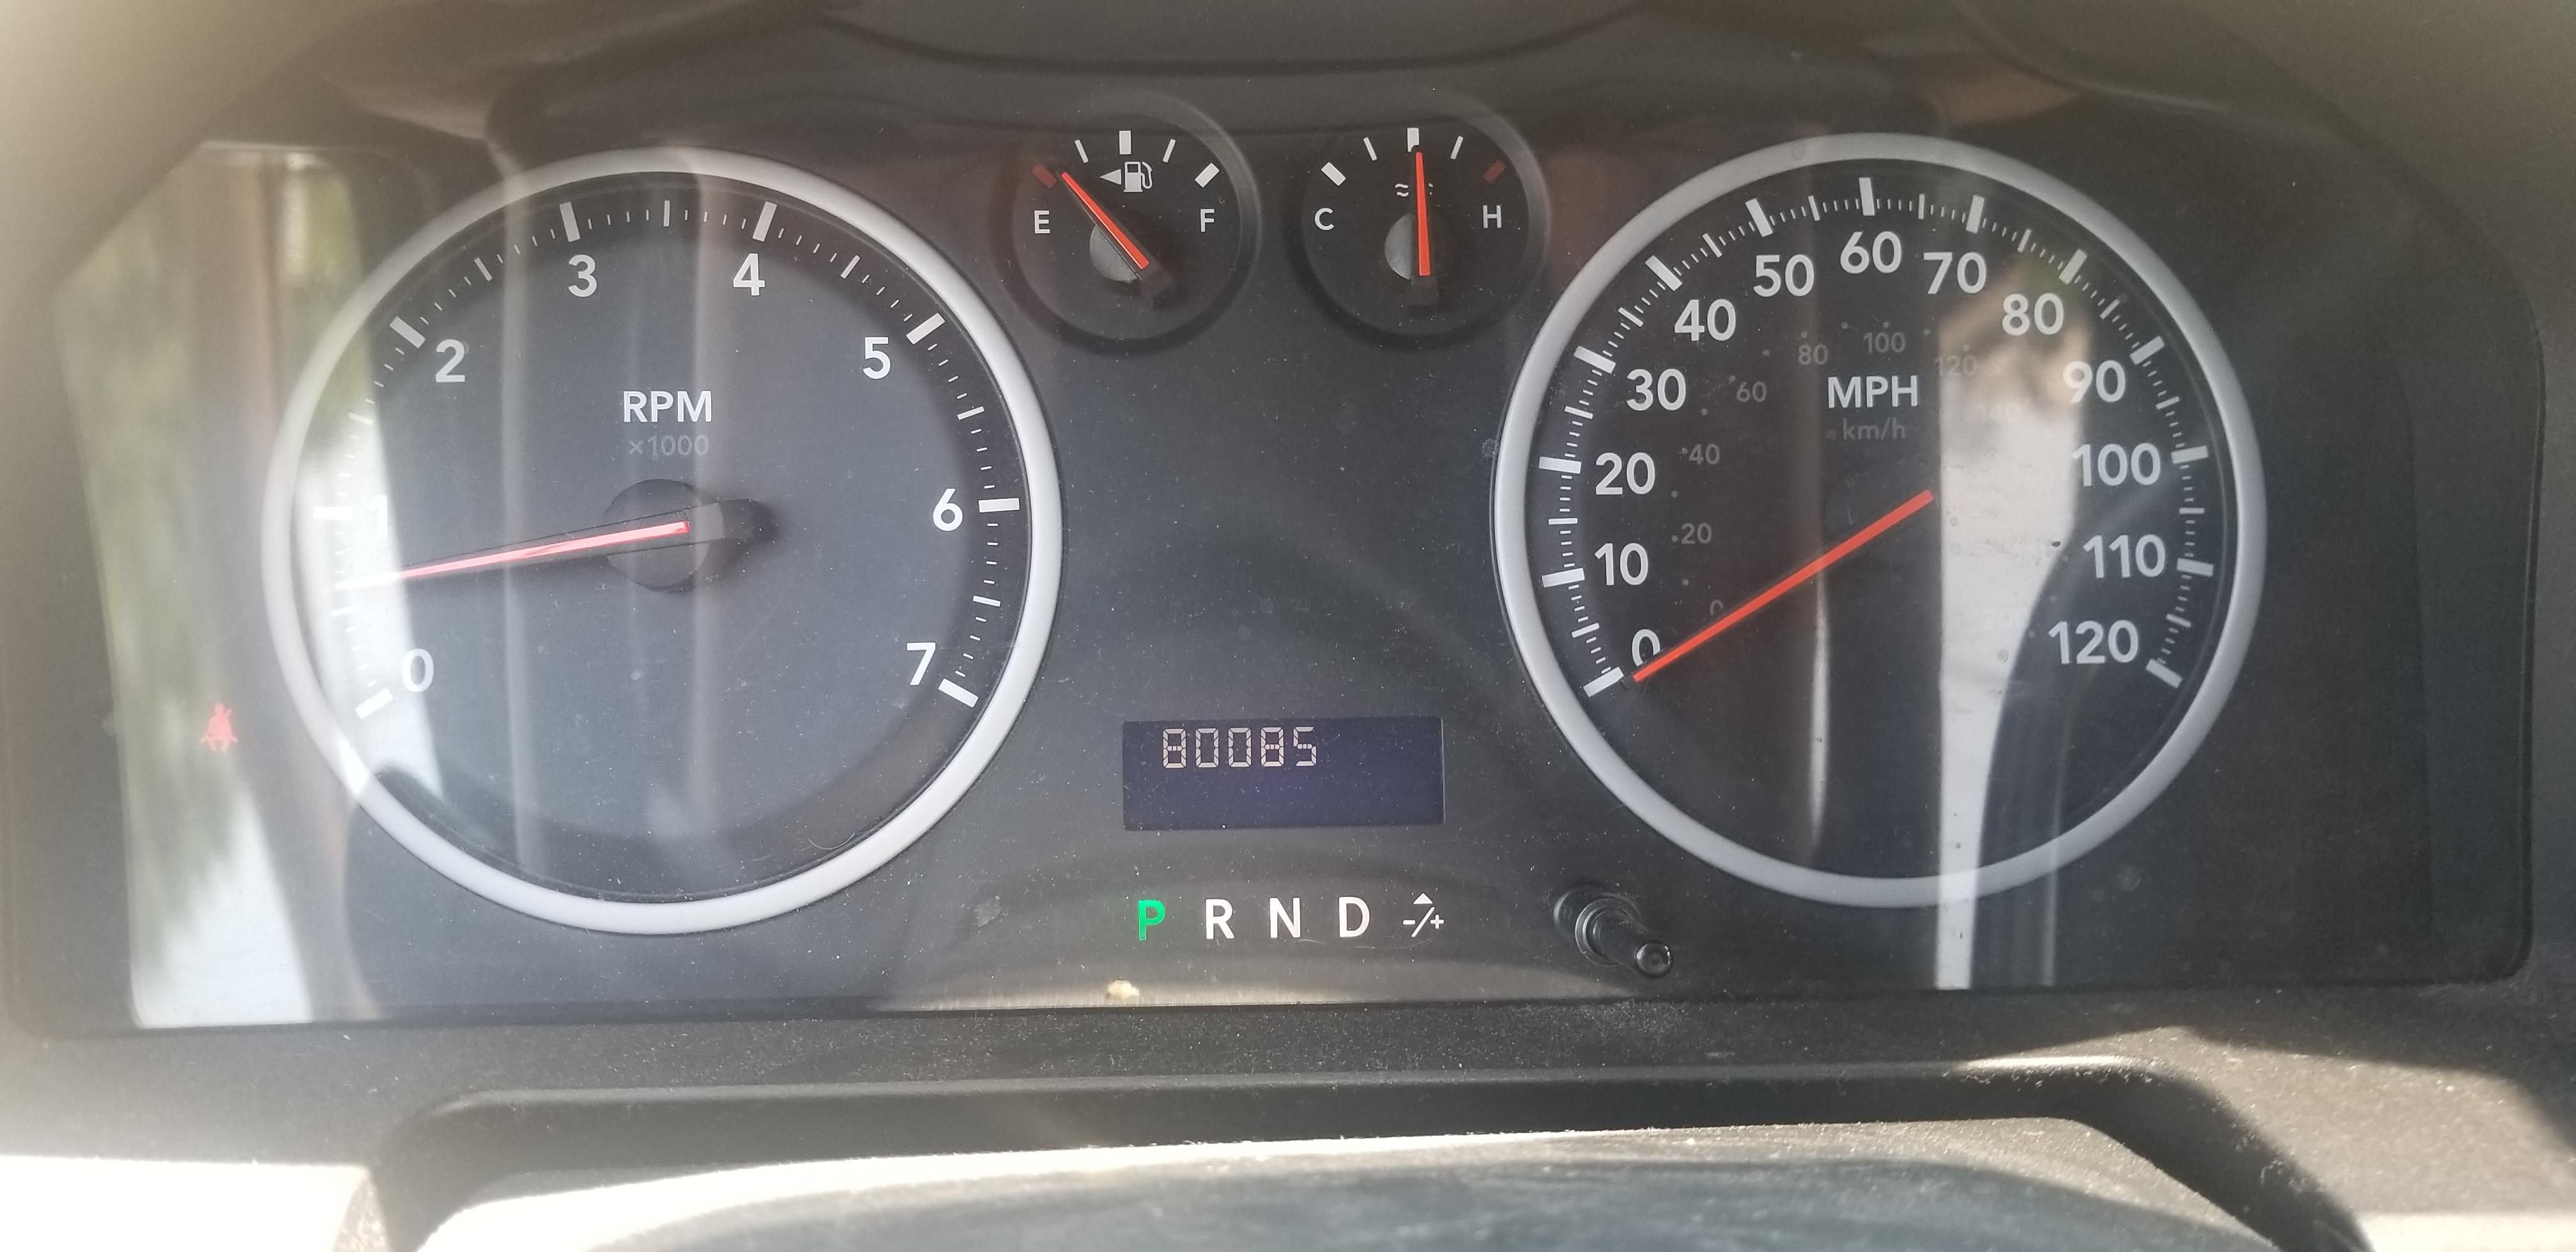 The work truck hit a very important milestone today